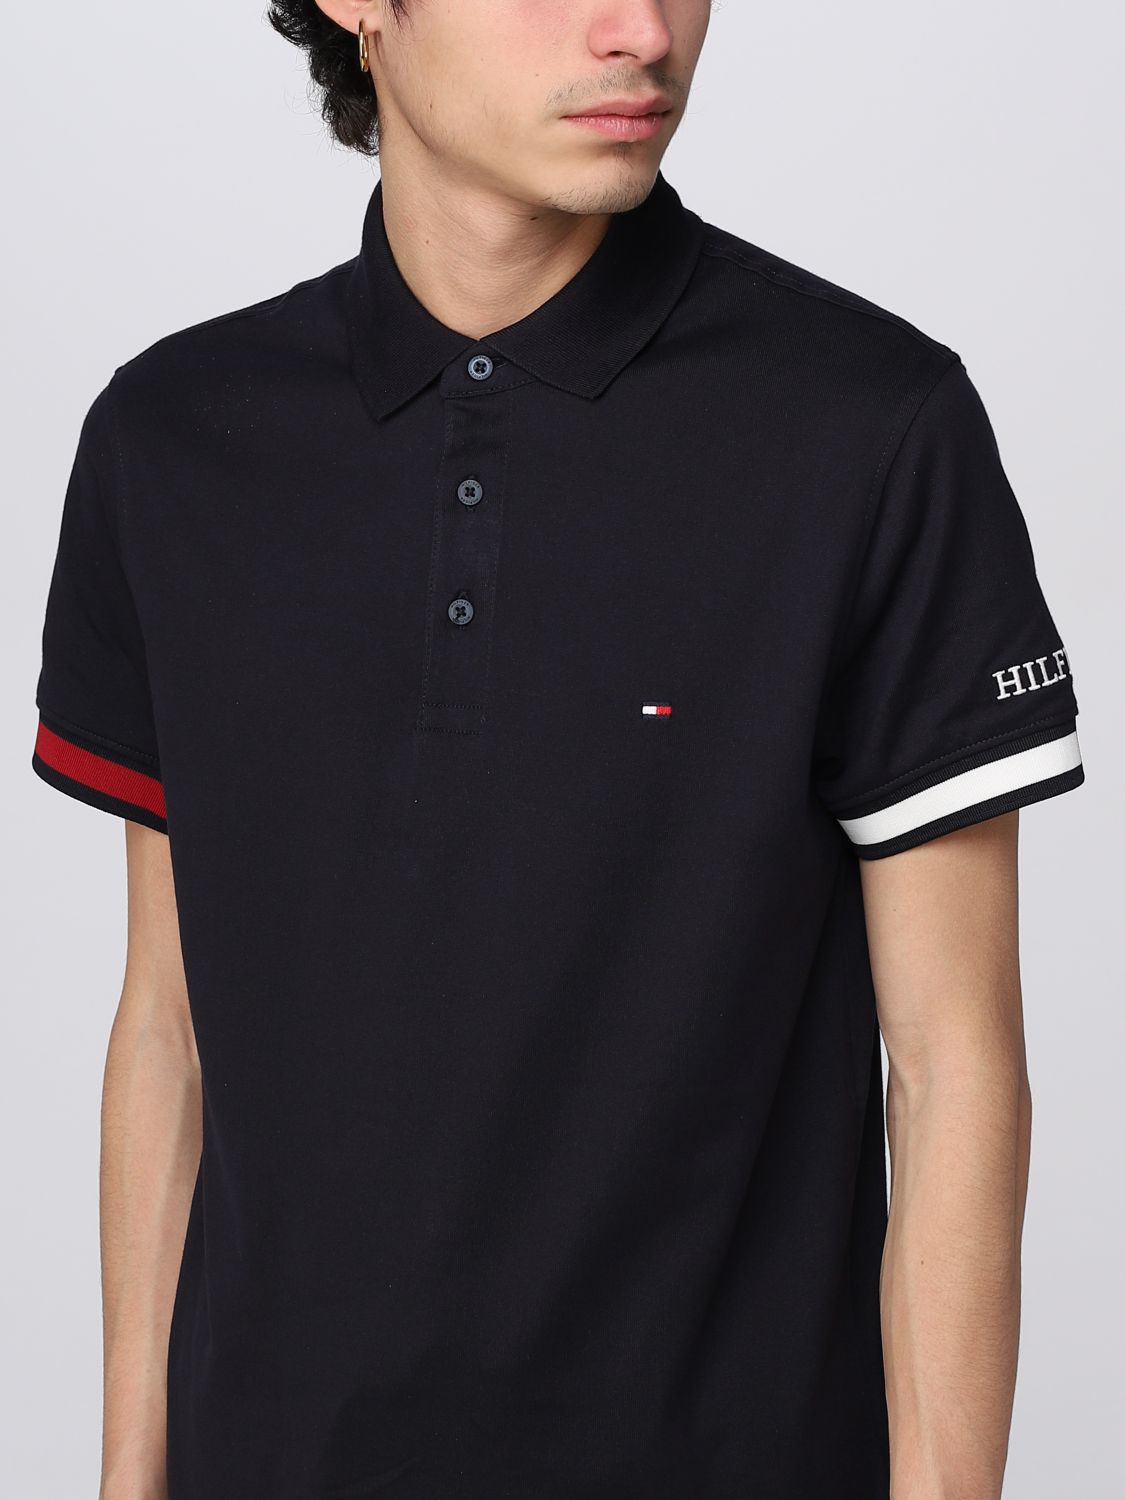 TOMMY HILFIGER: polo shirt for man - Blue | Tommy Hilfiger polo shirt ...